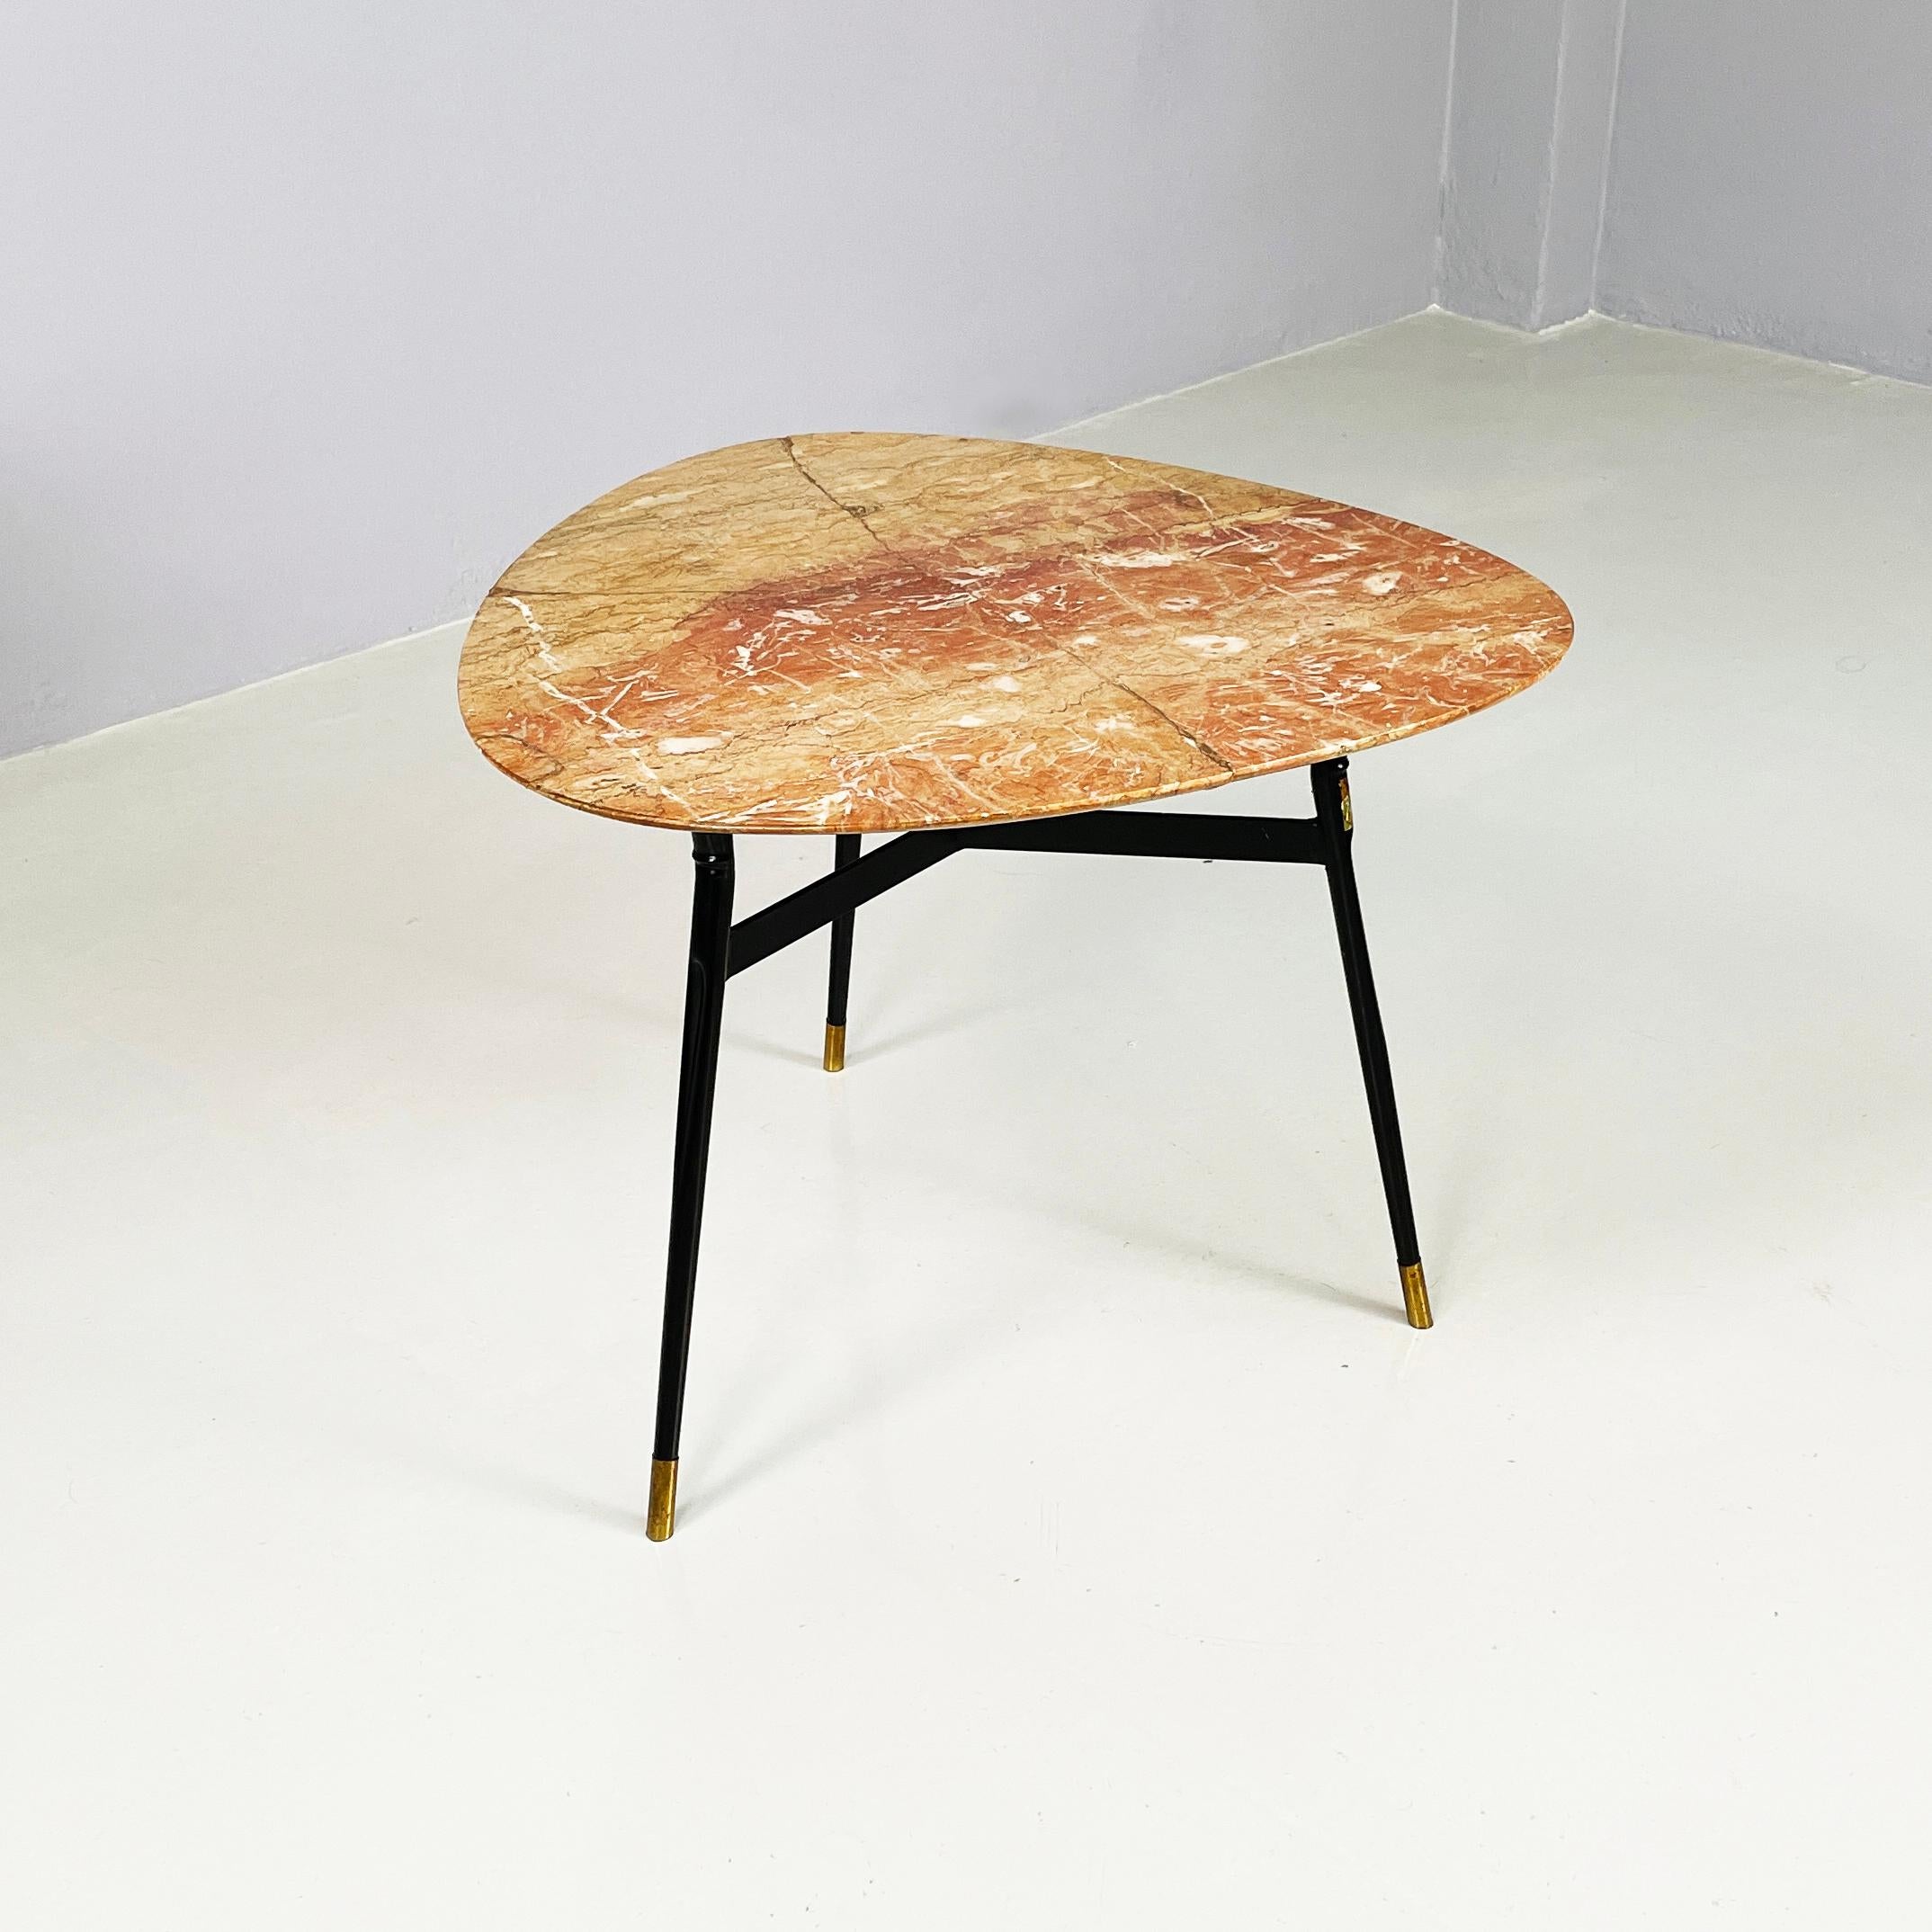 Italian mid-century modern Coffee table in red marble, black metal and brass, 1960s
Coffee table with triangular top with rounded corners in red marble. The rectangular section structure and the round section legs are in black painted metal. Round